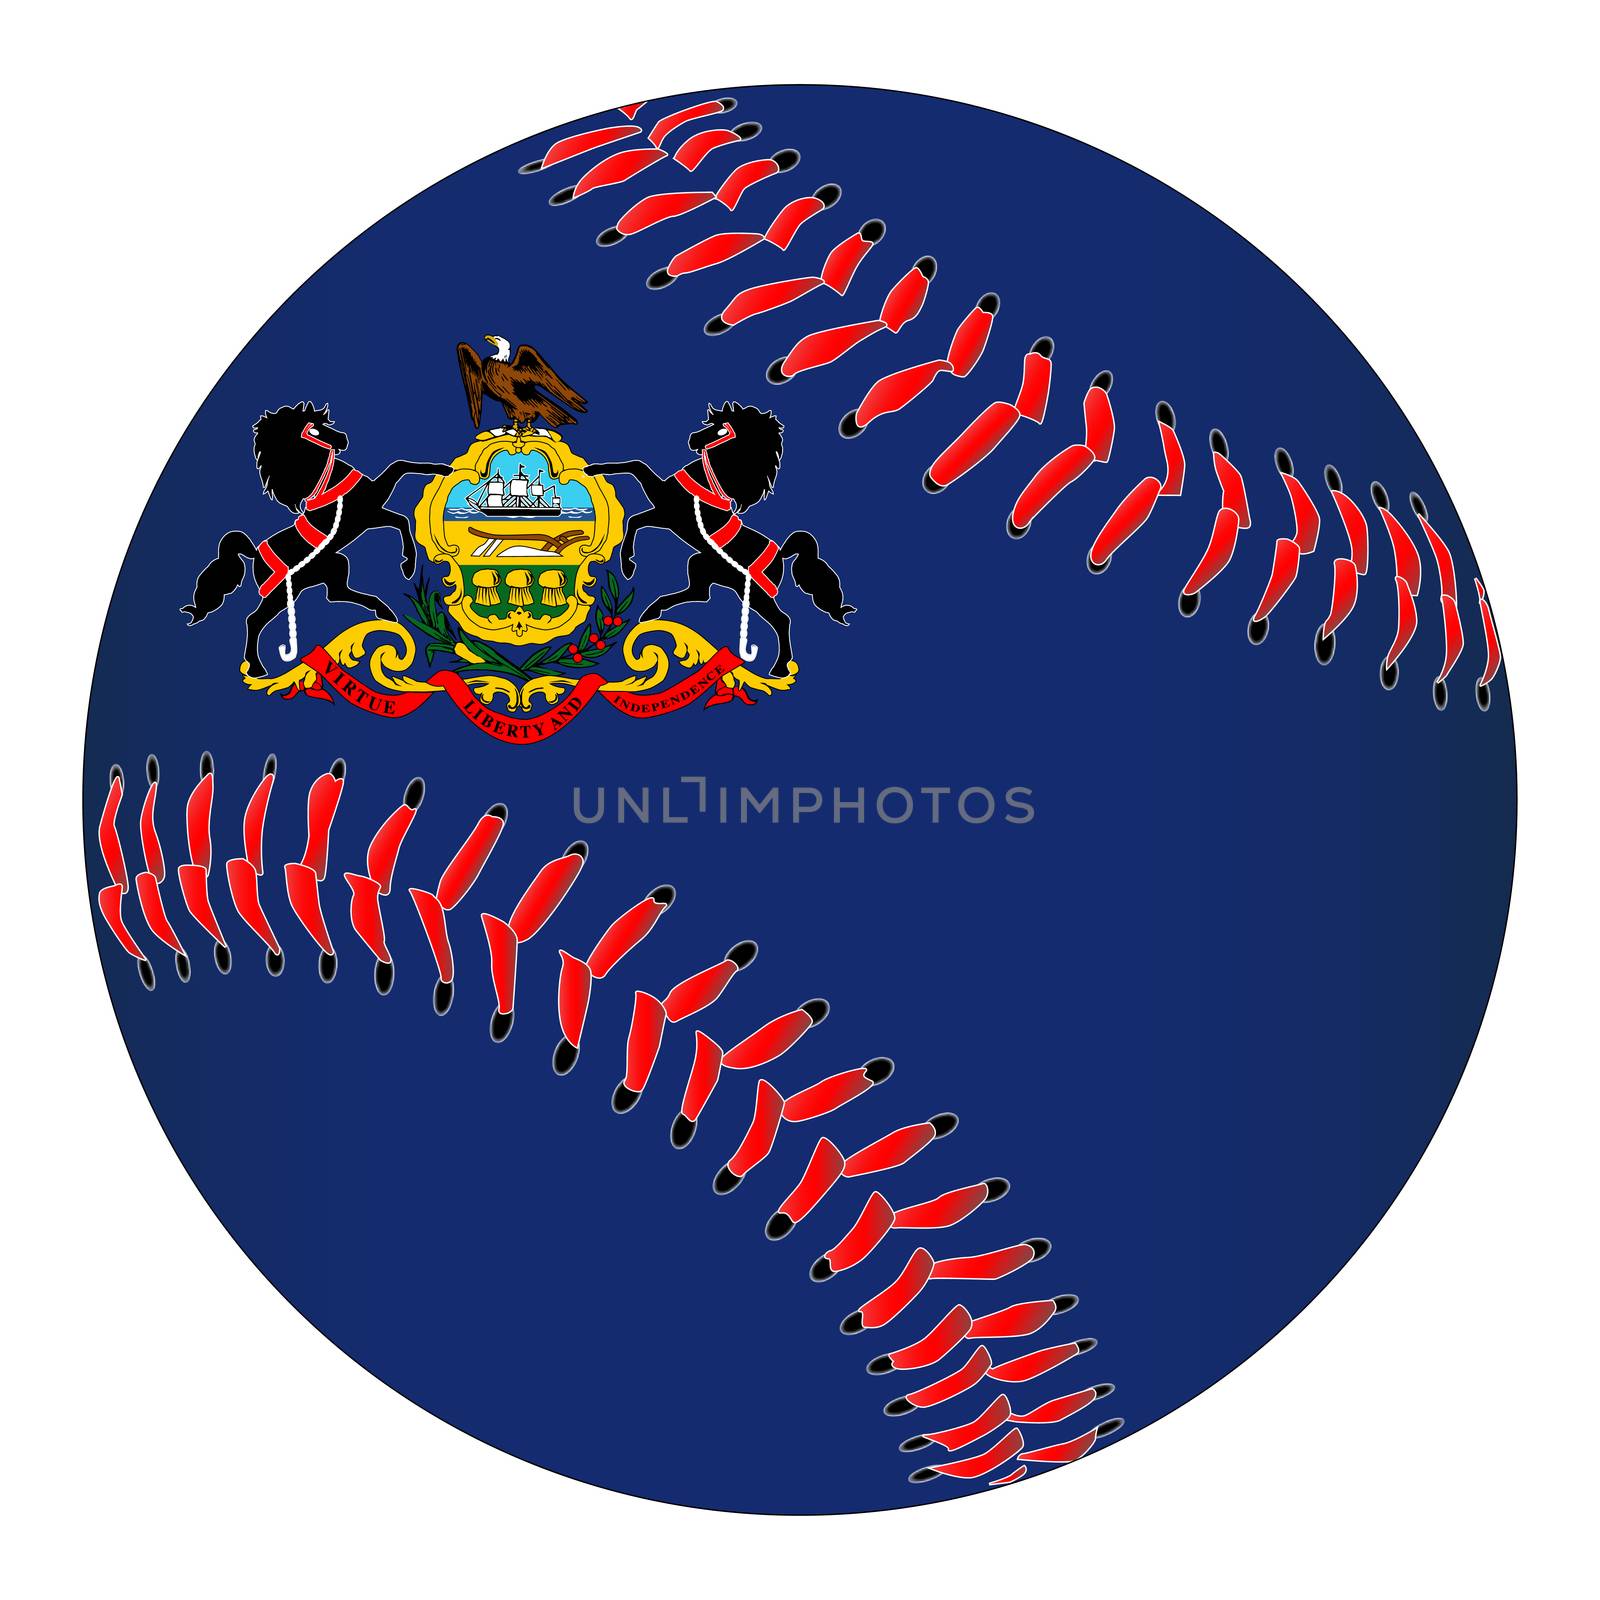 A new white baseball with red stitching with the Pennsylvania state flag overlay isolated on white